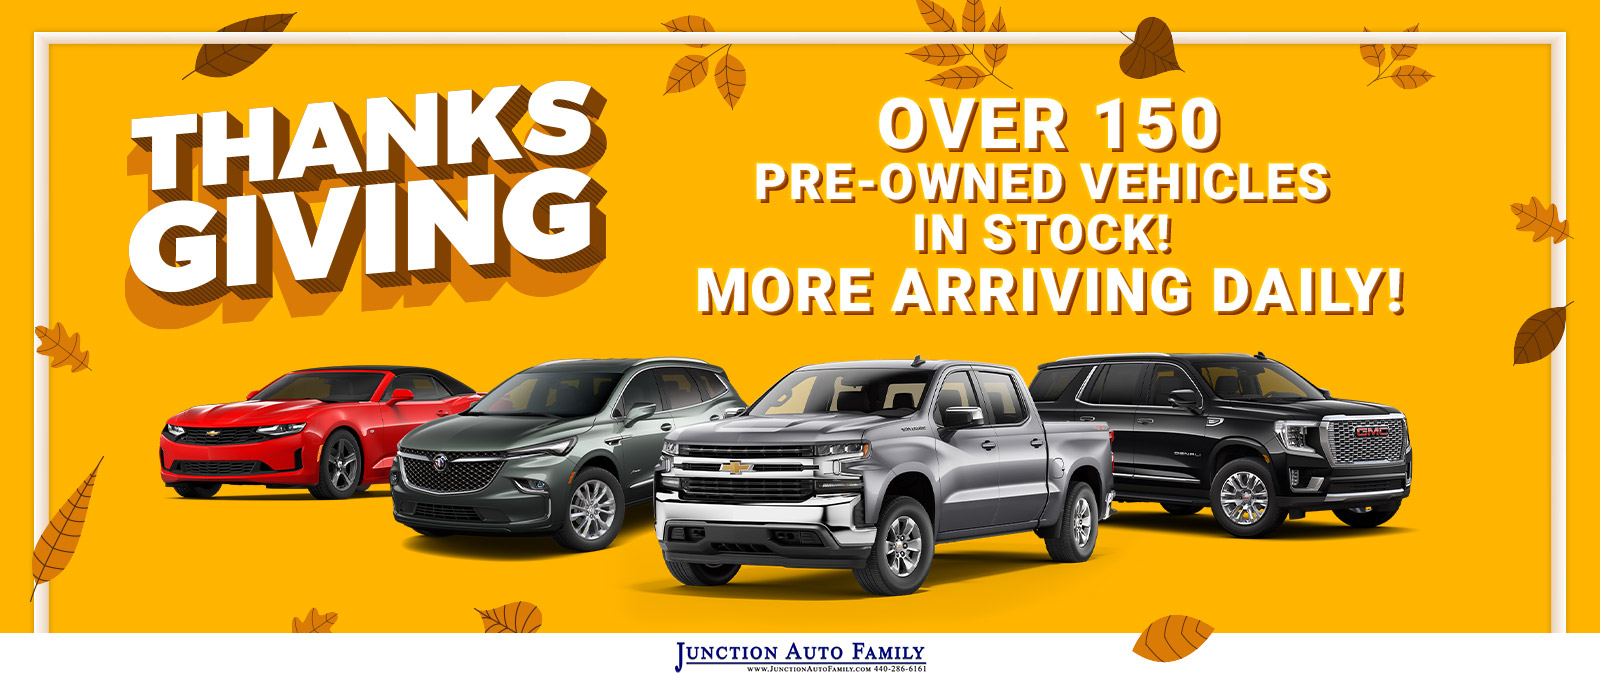 We Have over 150 Pre-Owned Vehicles in Stock